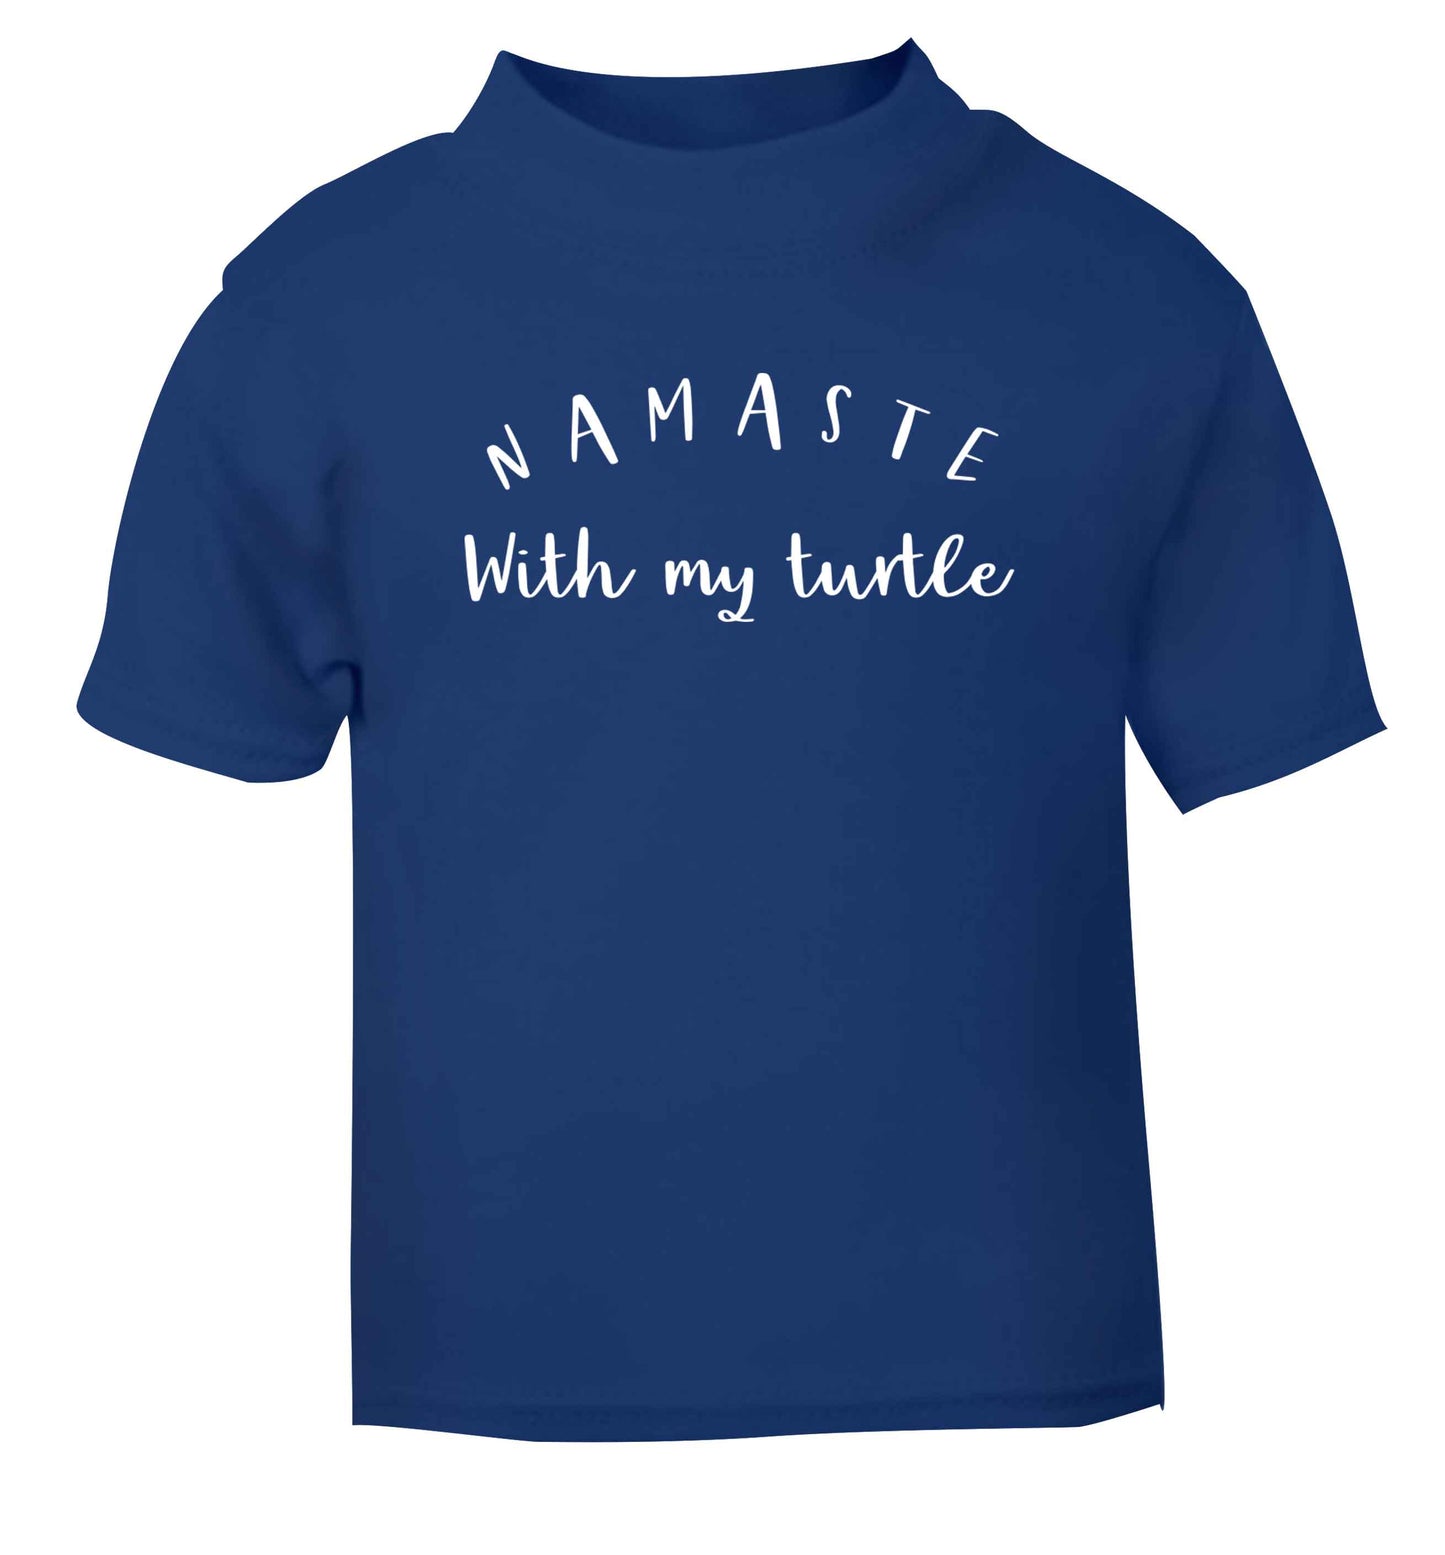 Namaste with my turtle blue Baby Toddler Tshirt 2 Years